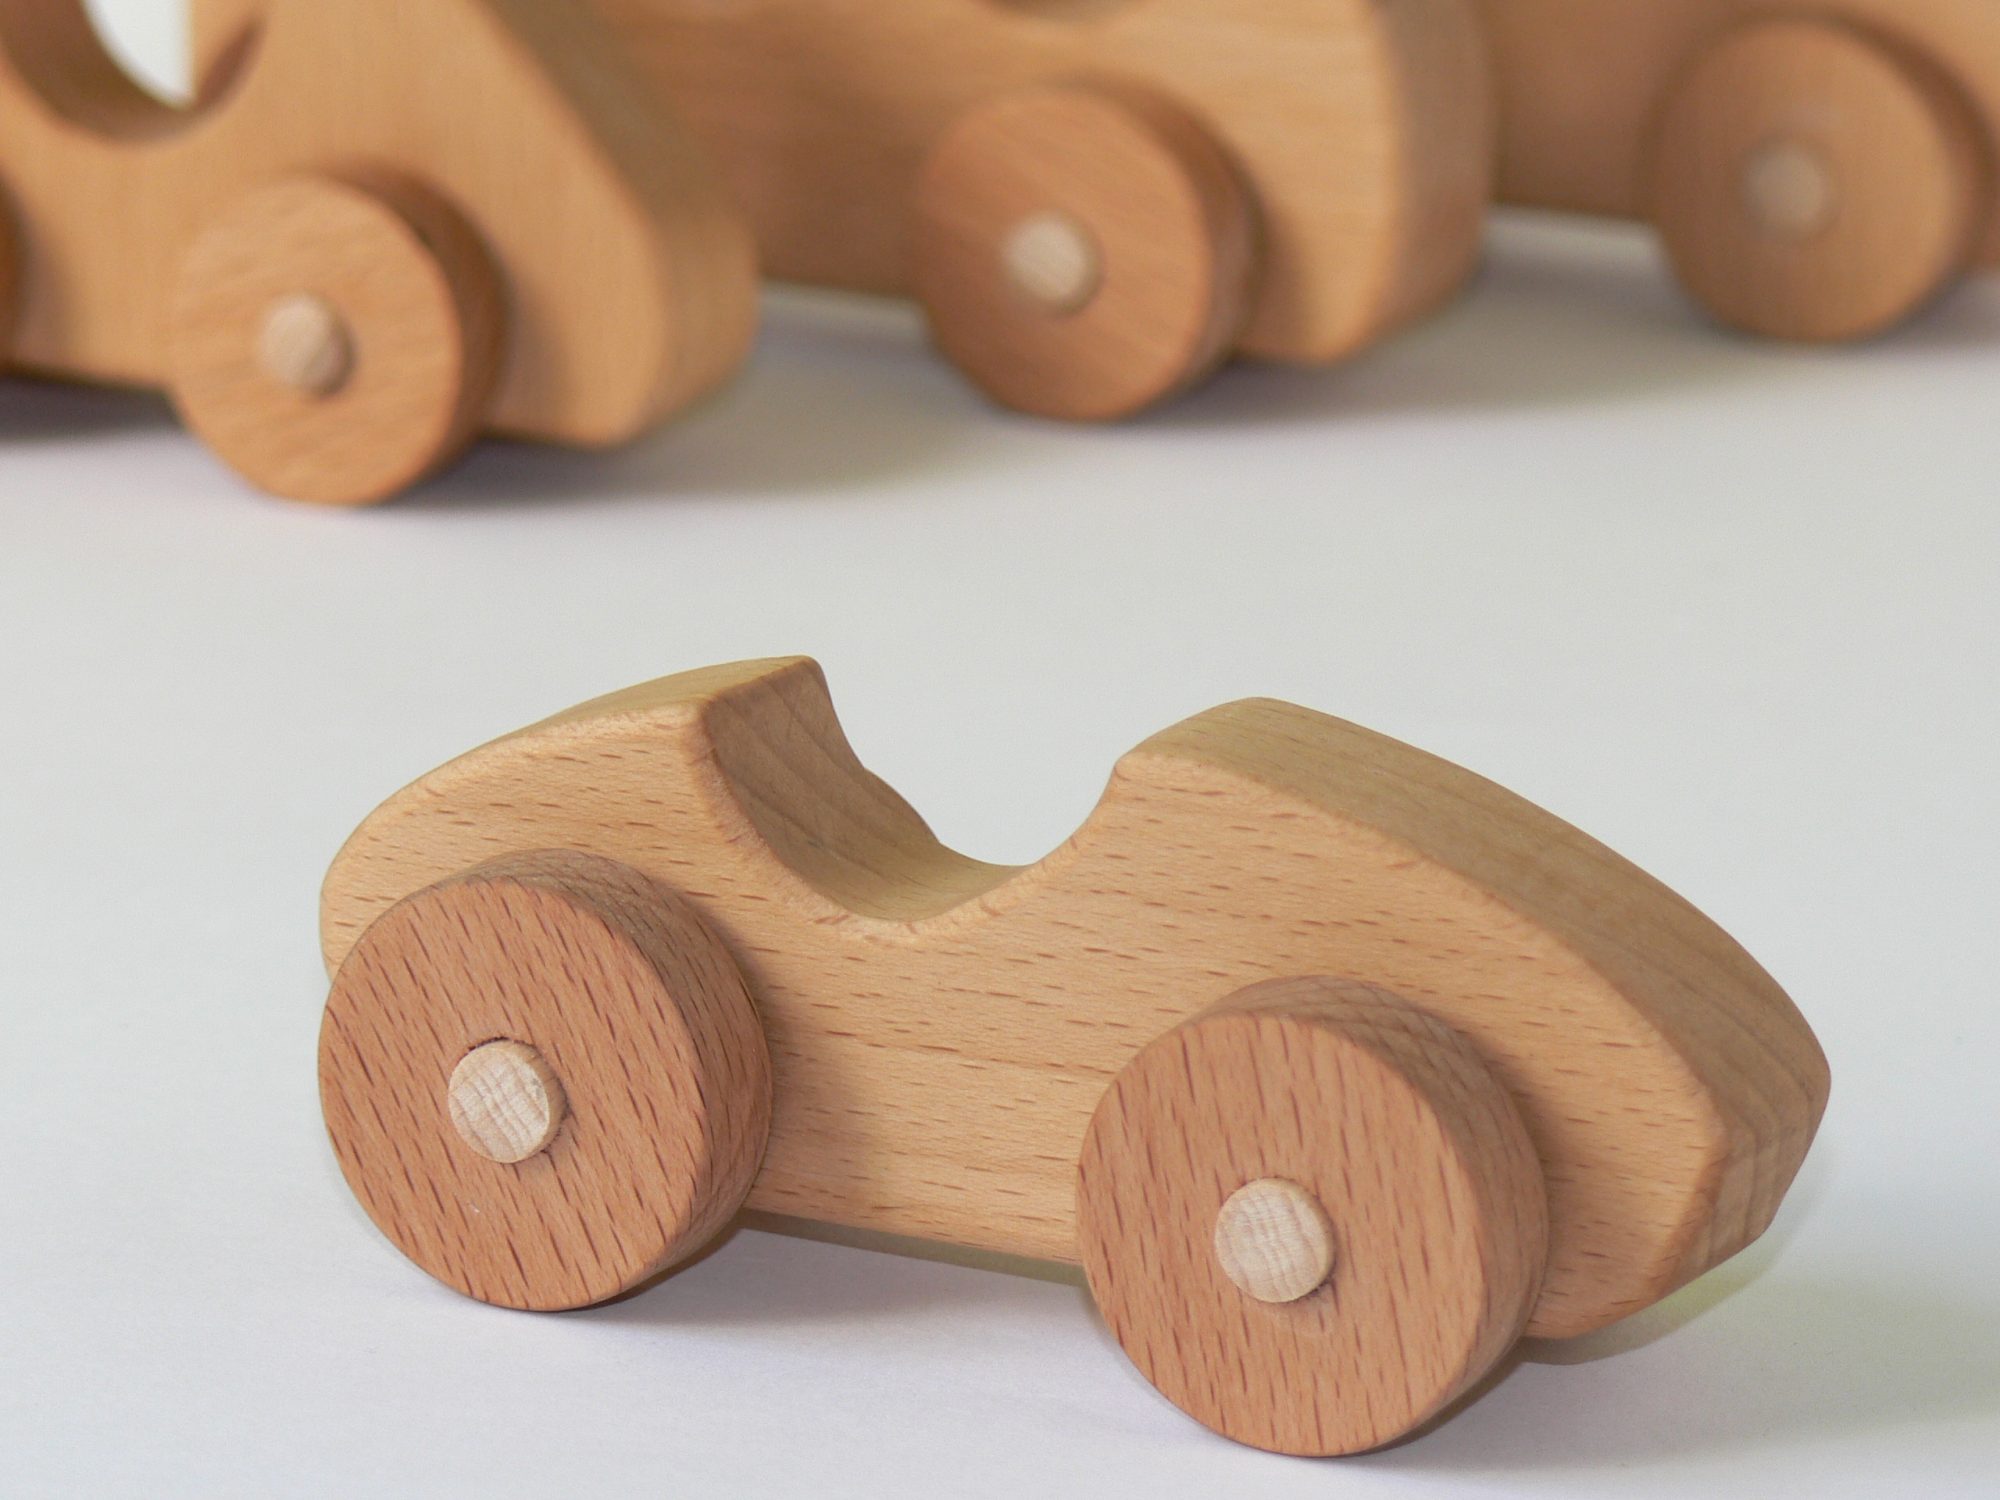 Push Racing Car Wooden Toy Eco friendly handmade wooden ...